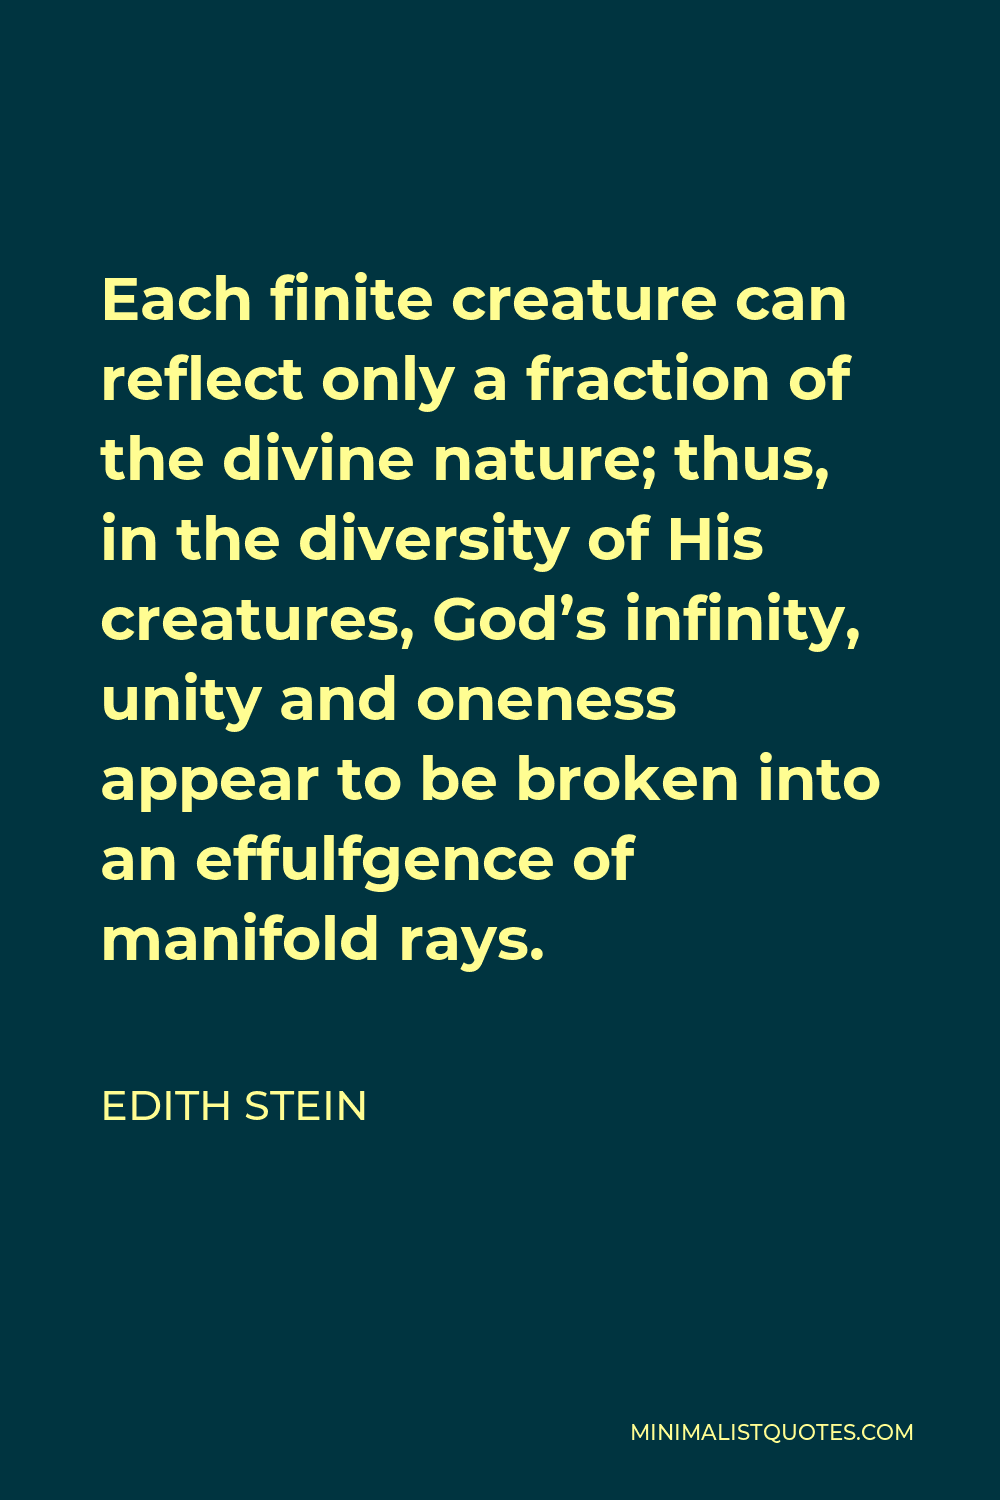 Edith Stein Quote - Each finite creature can reflect only a fraction of the divine nature; thus, in the diversity of His creatures, God’s infinity, unity and oneness appear to be broken into an effulfgence of manifold rays.